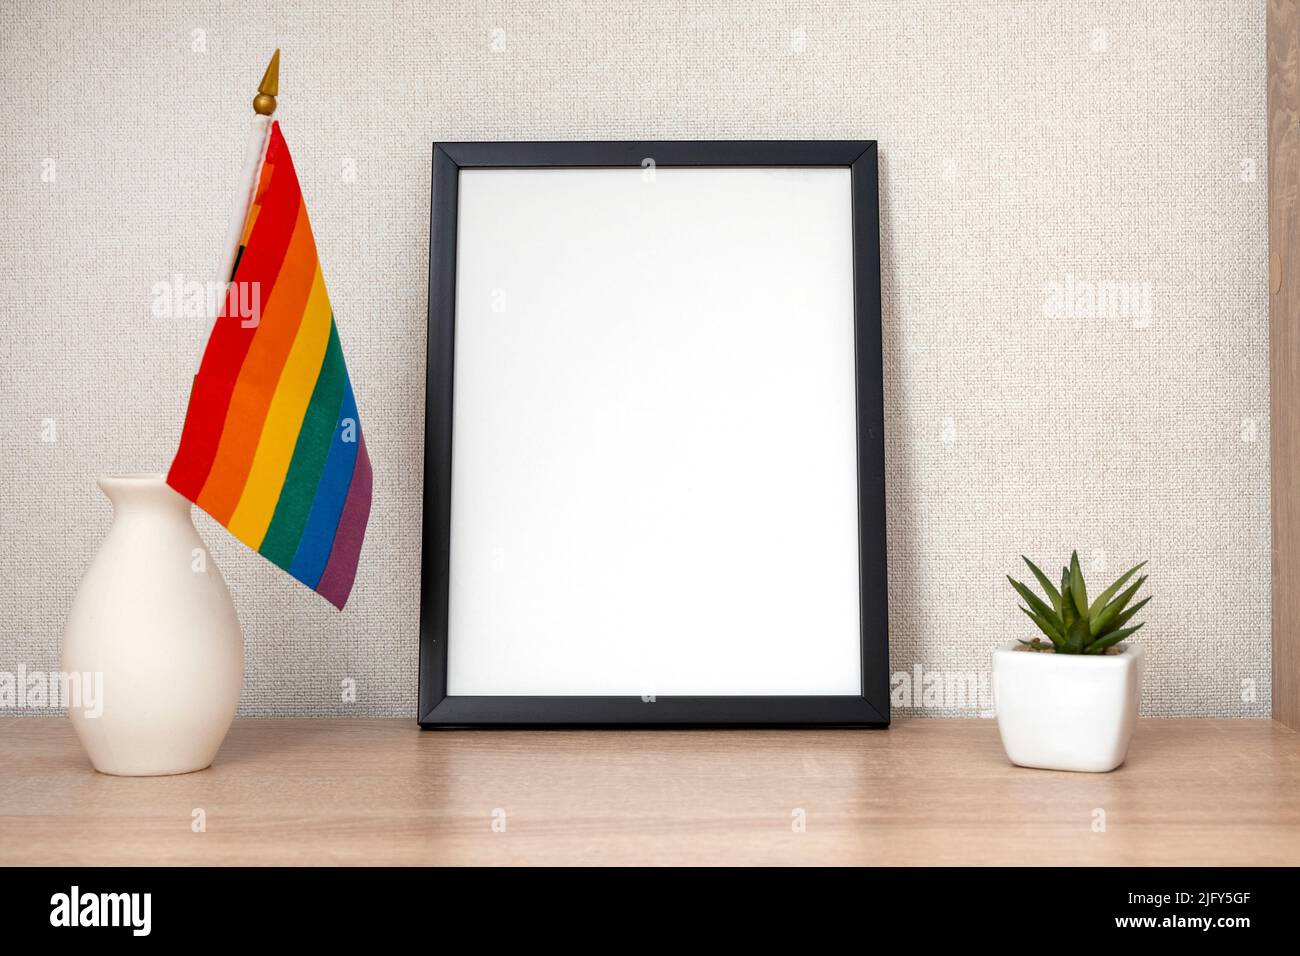 LGBT office, desk with rainbow flag and stationery, blank frame with space for text Stock Photo